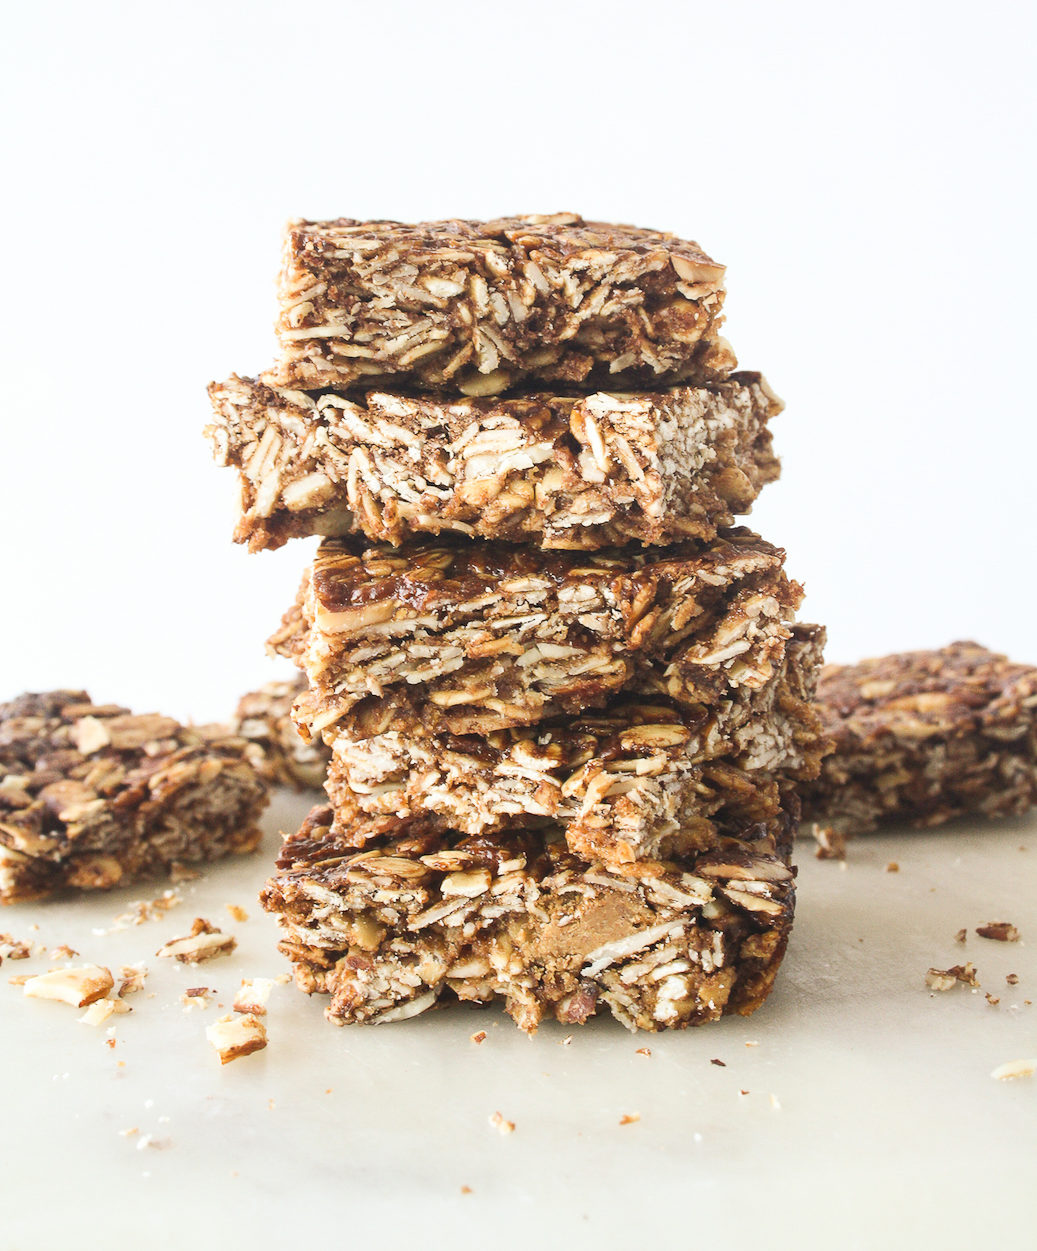 Chewy, crunchy, healthy granola bars made with almond butter and cocoa!